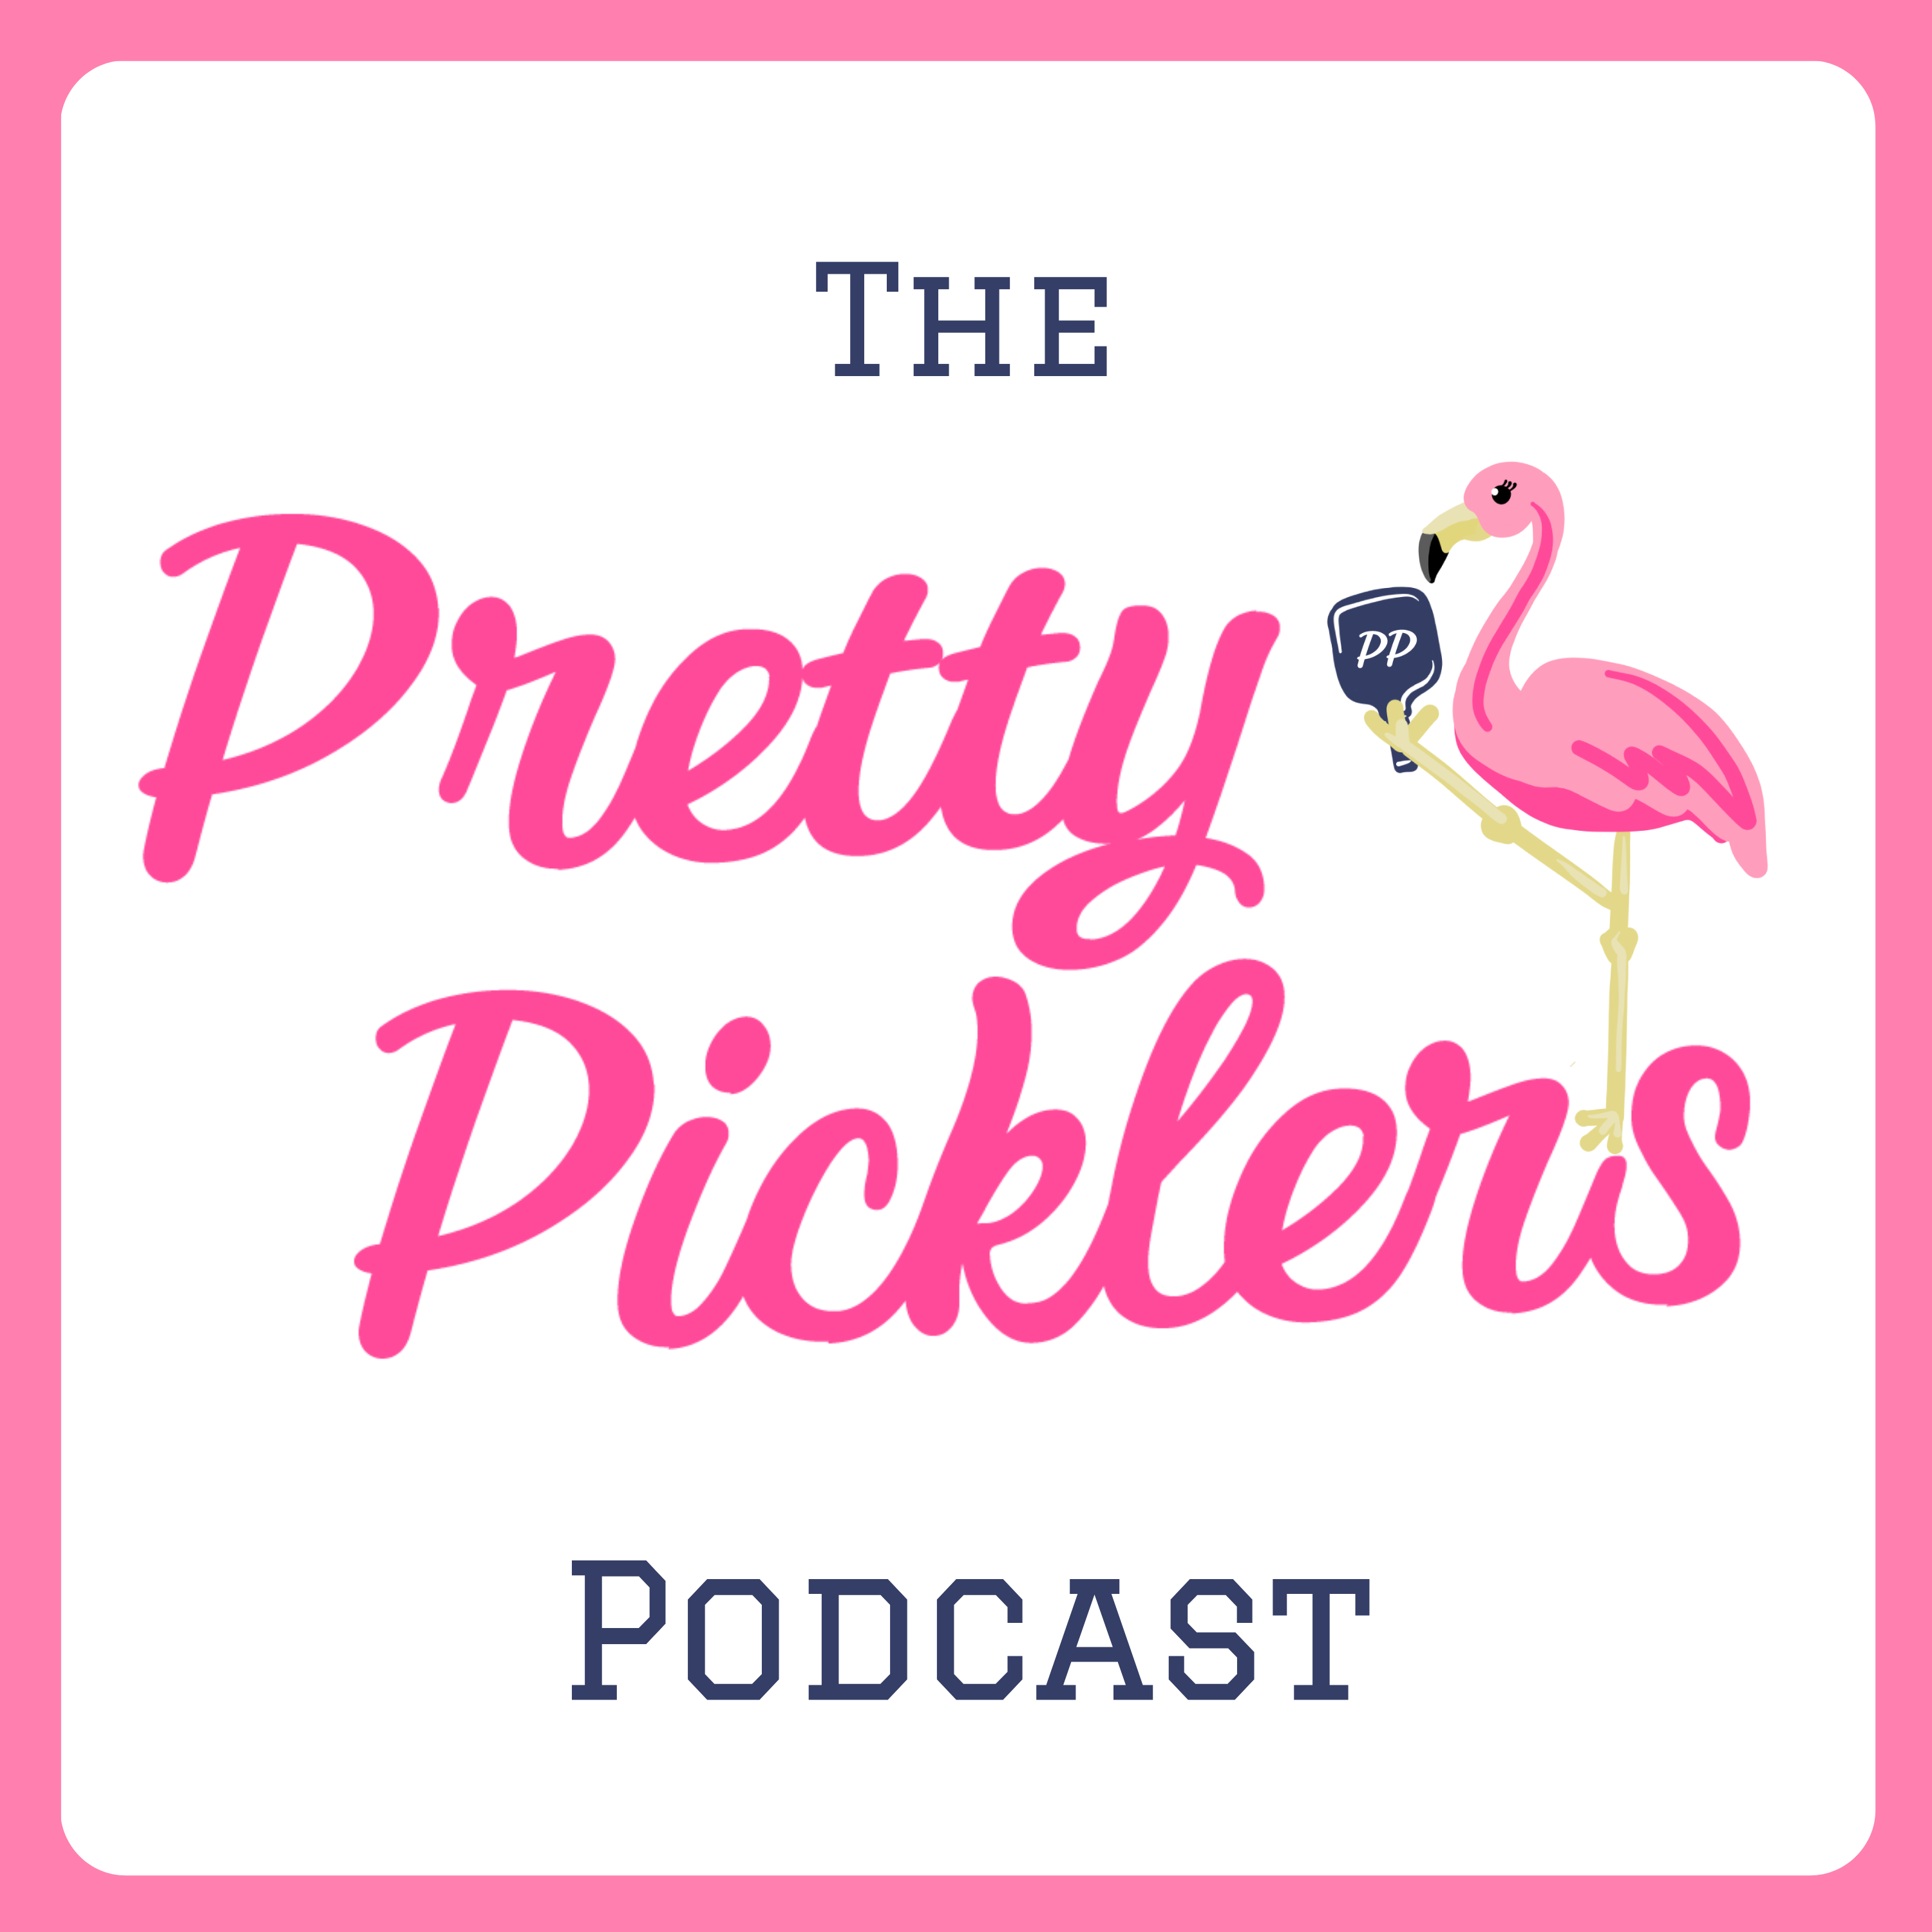 Artwork for The Pretty Picklers Podcast